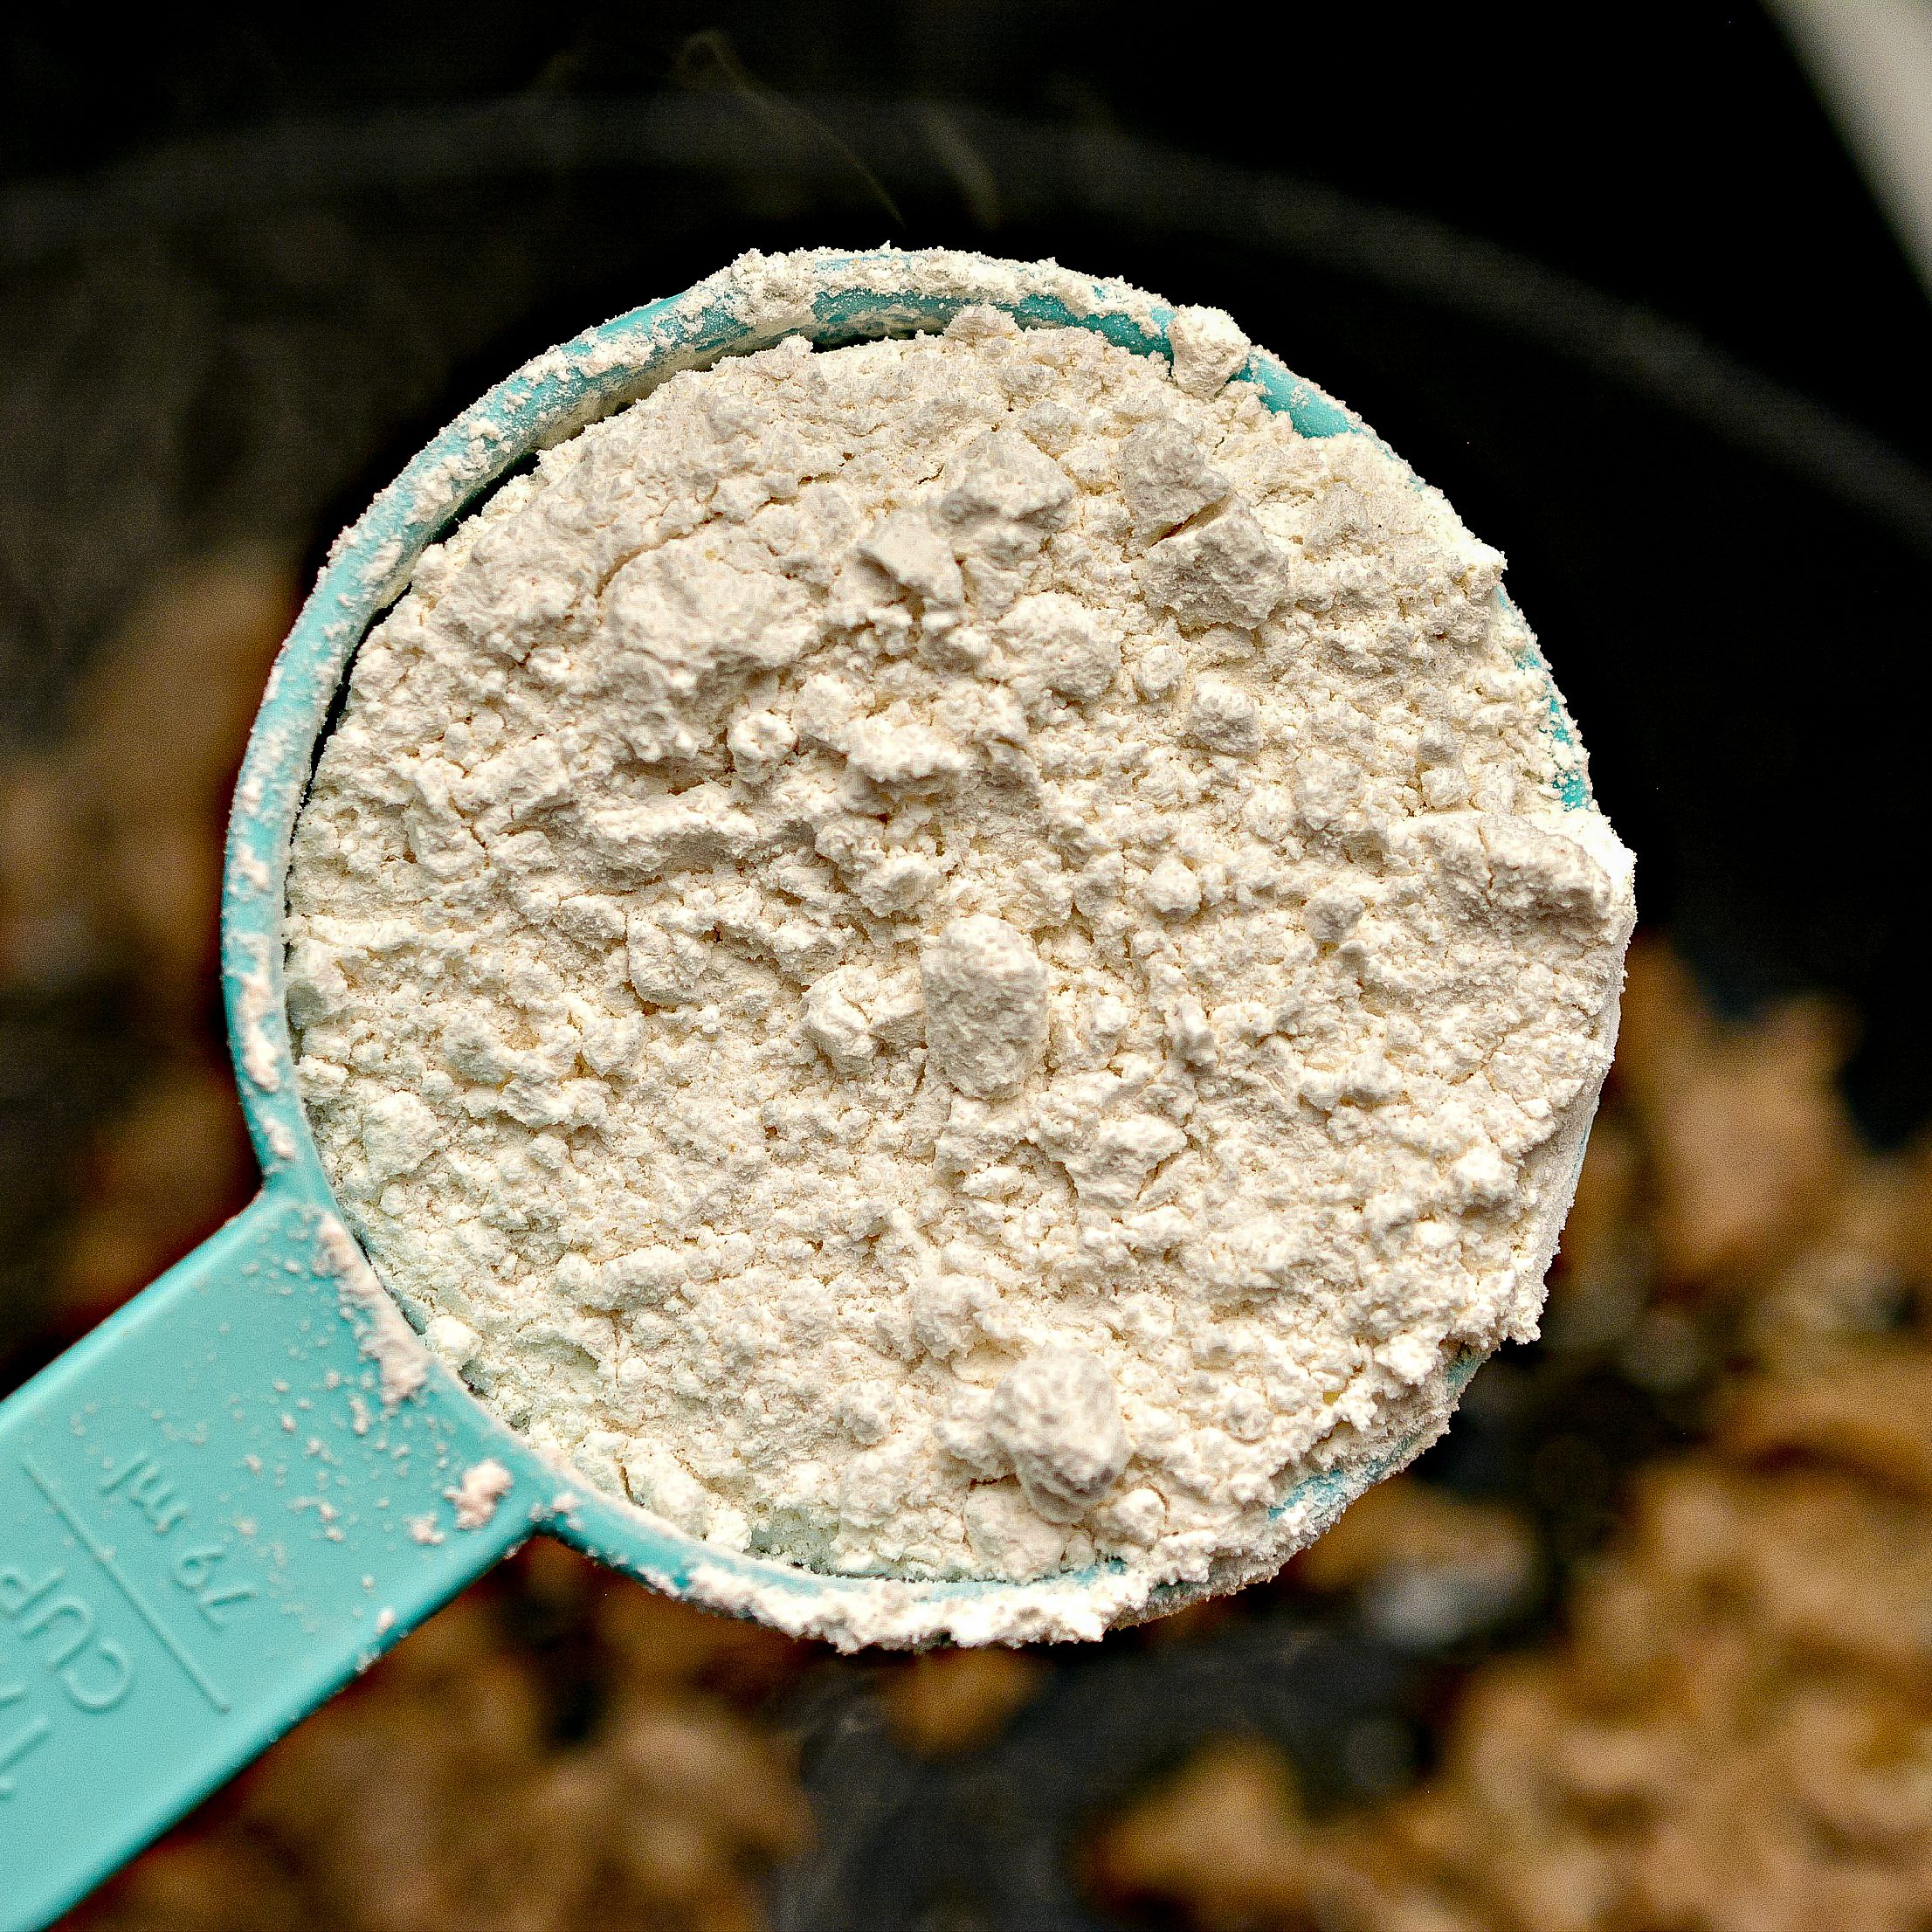 Add the flour to the skillet and stir to combine well. Lower the heat to medium.